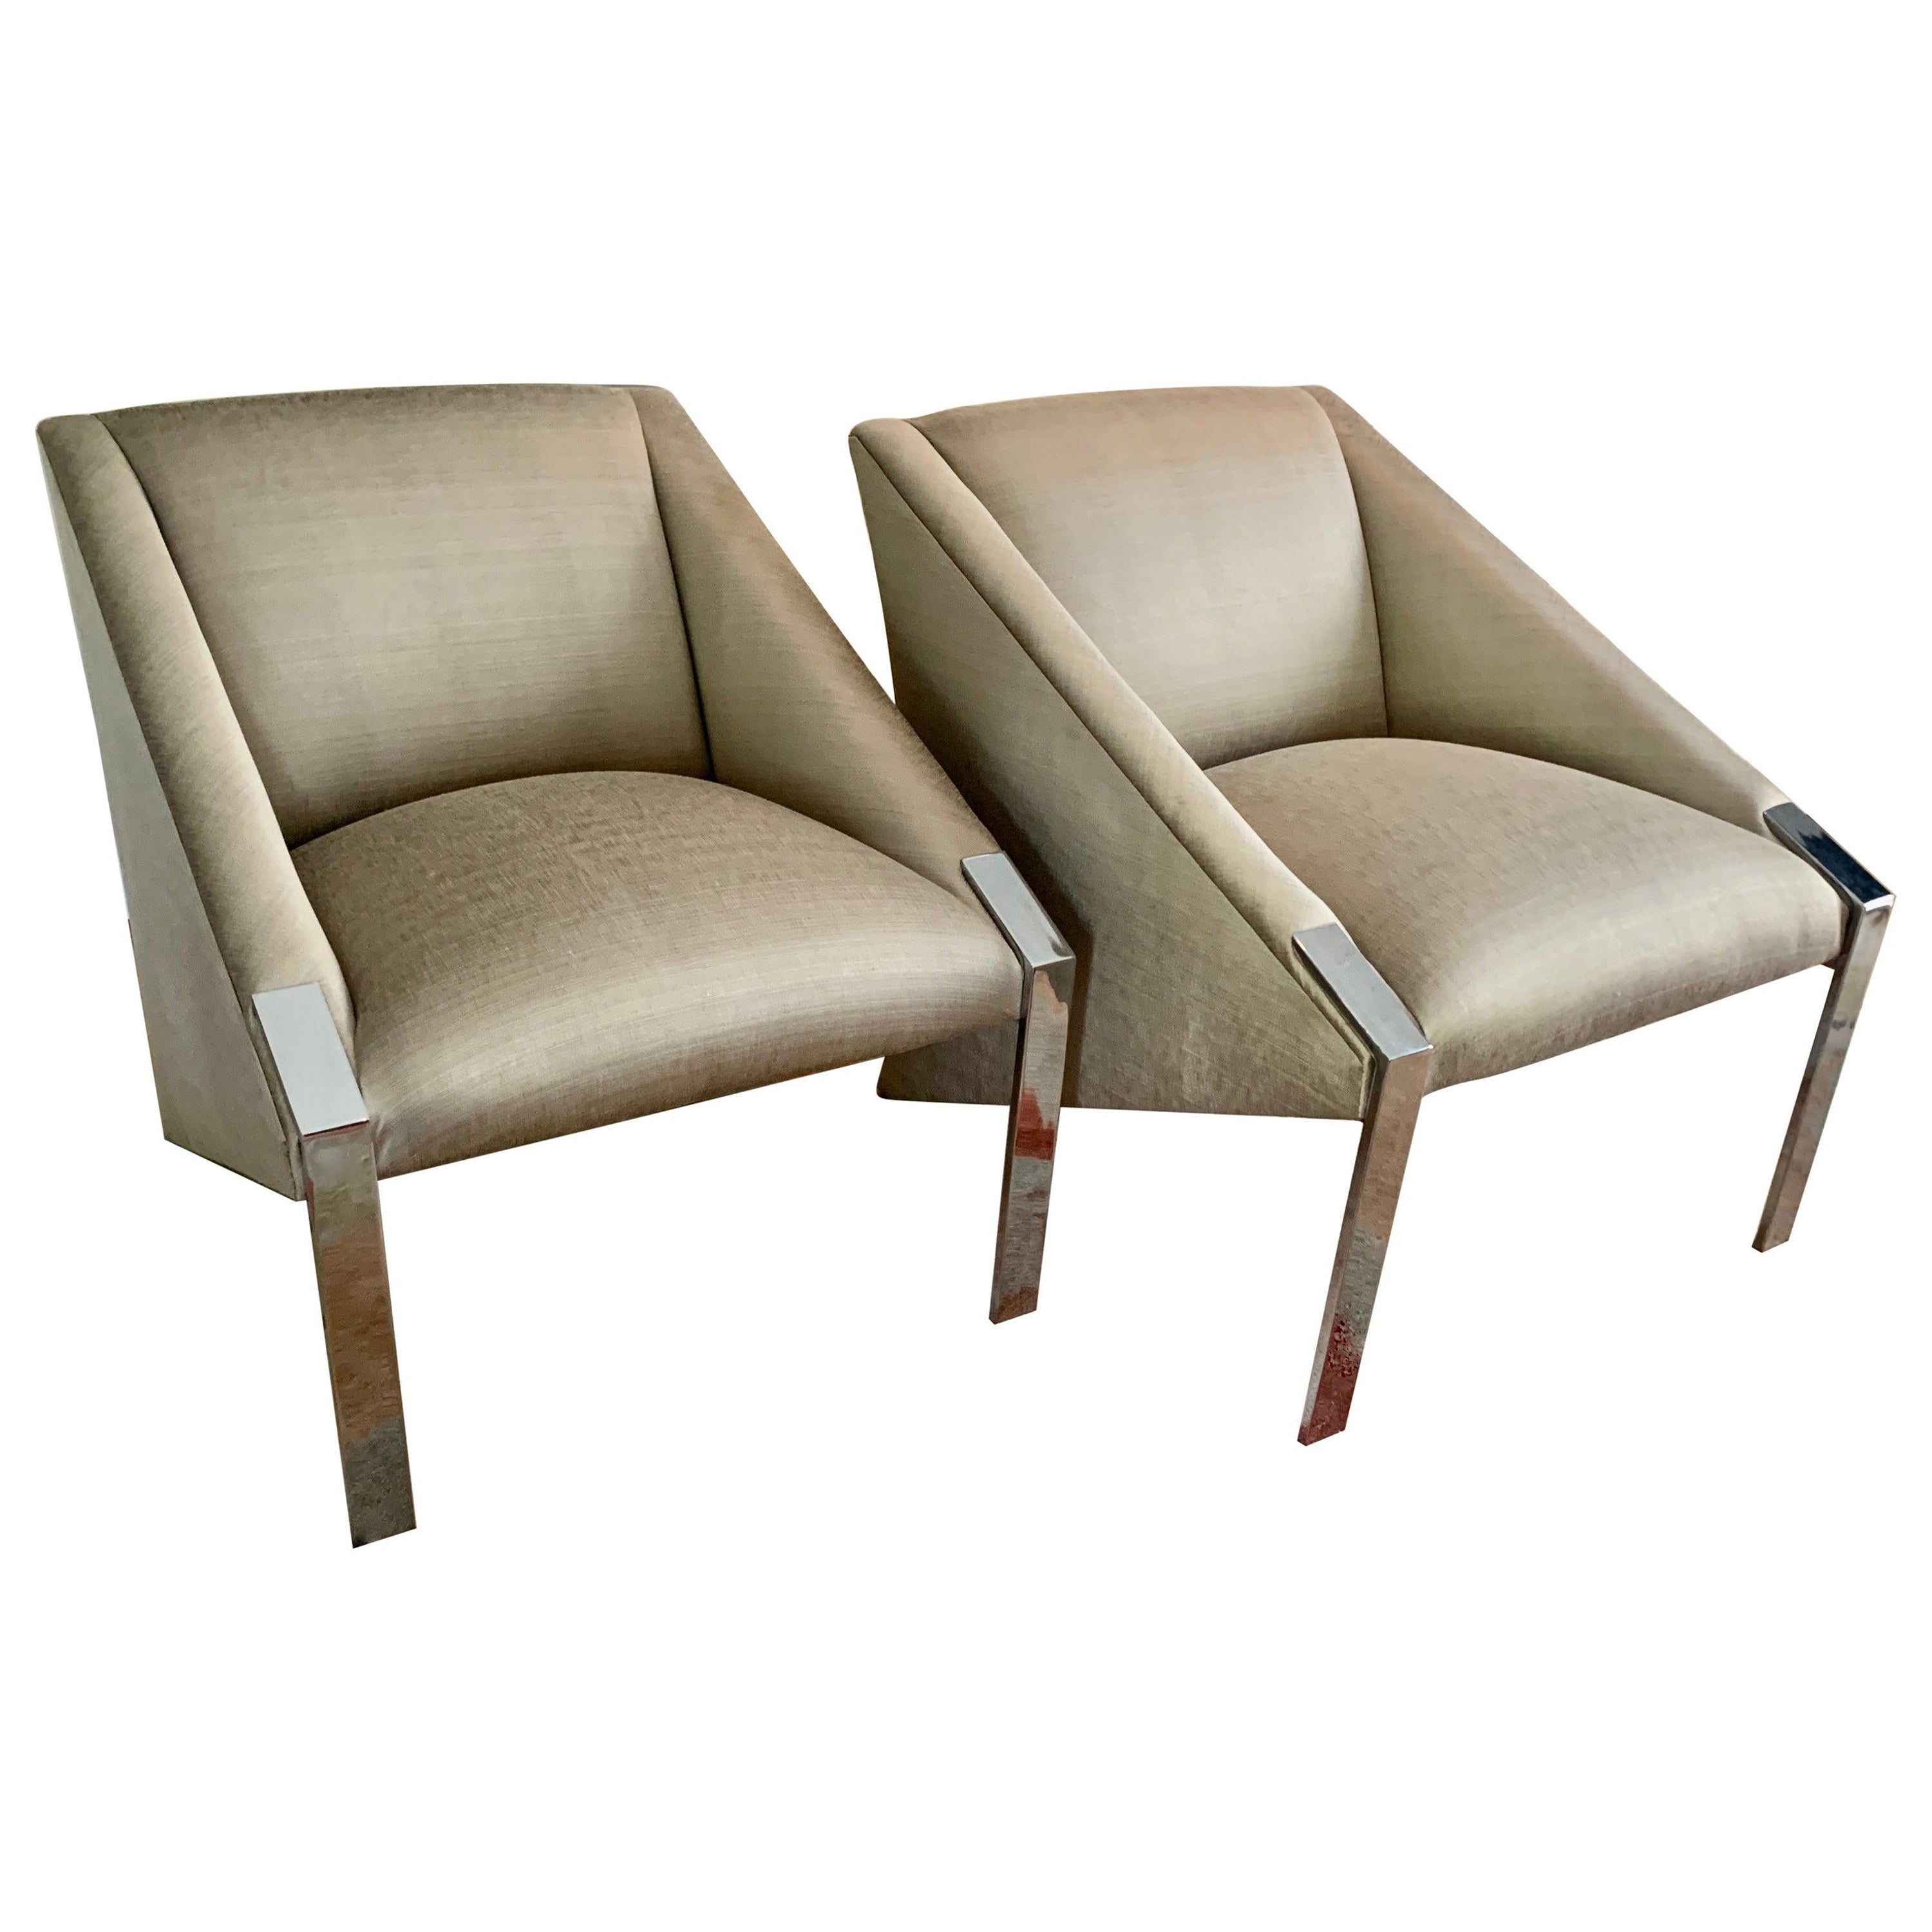 Andree Putman Pair Chrome Lounge Side Chairs in Silk Upholstery